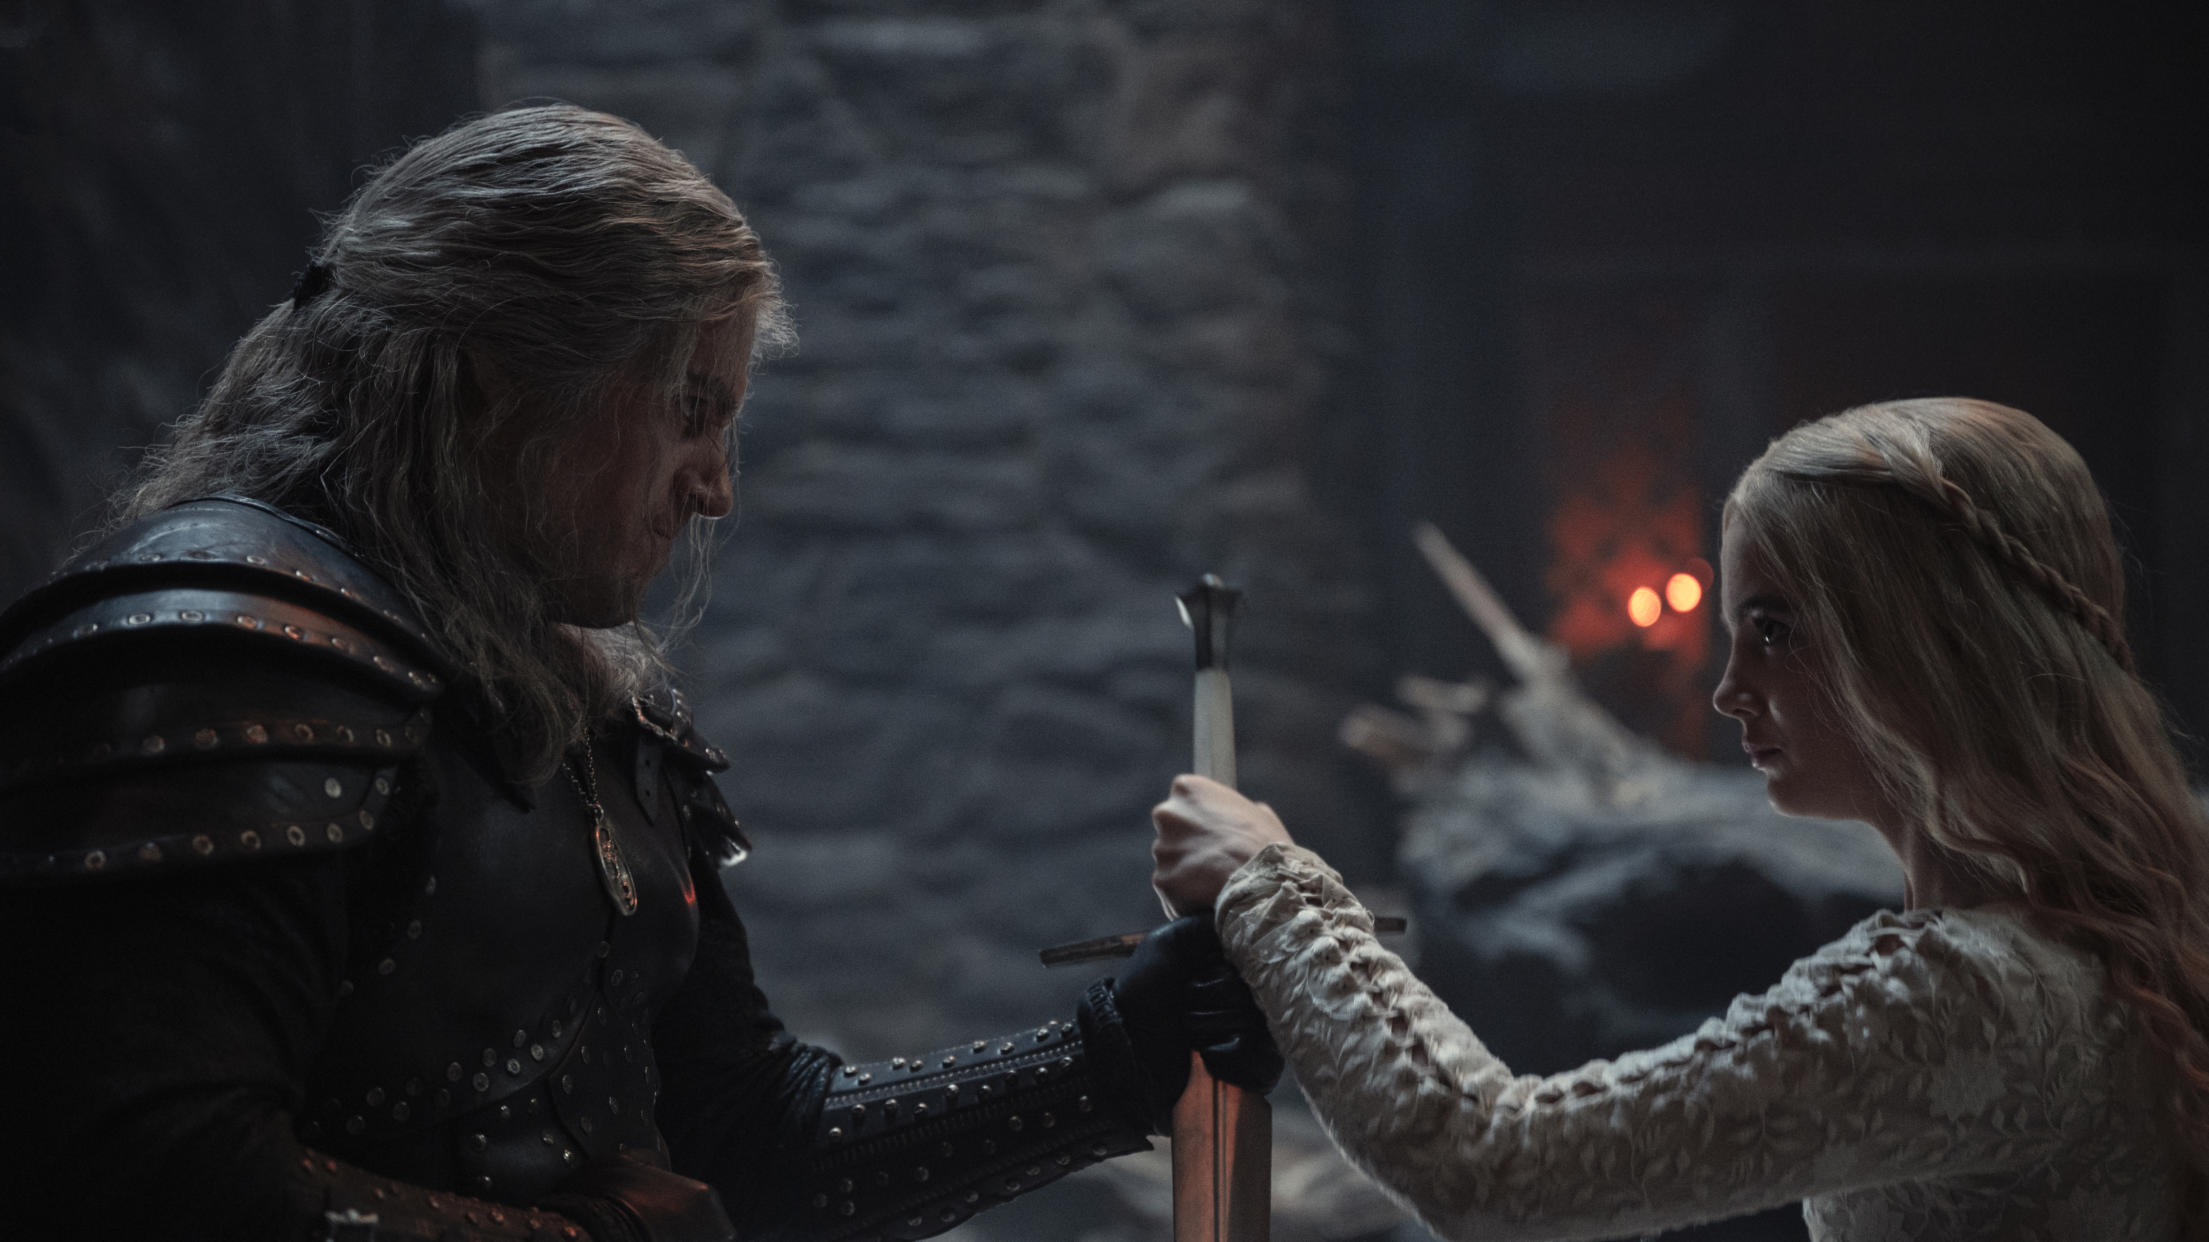 Henry Cavill and Freya Allan in The Witcher season two. (Credit: Netflix/Susie Allnutt)